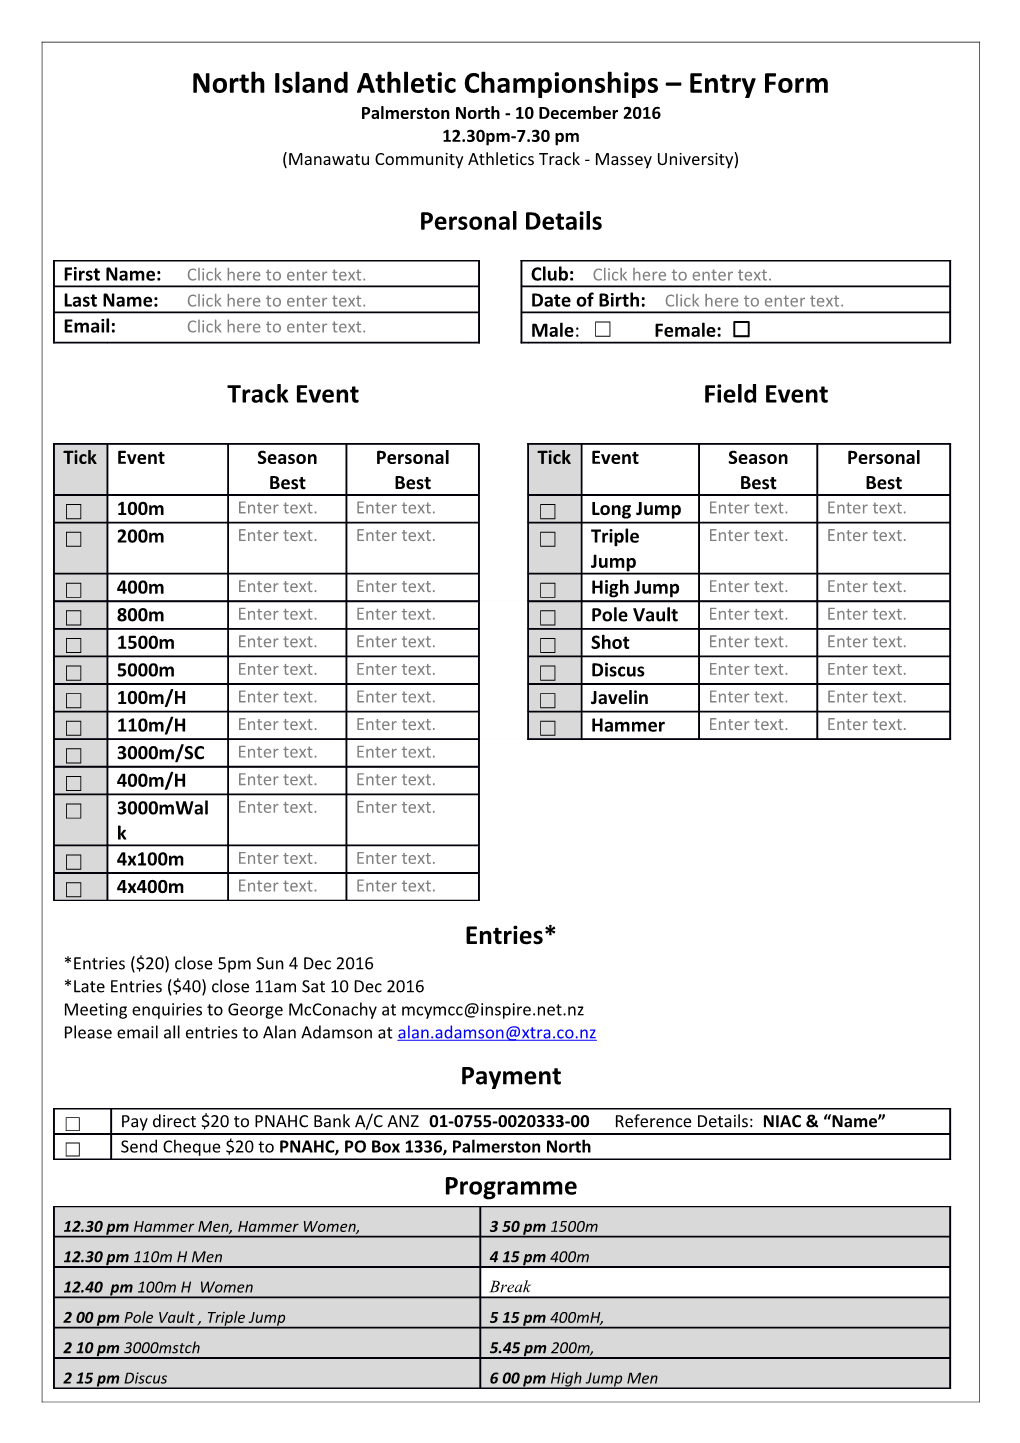 North Island Athletic Championships Entry Form